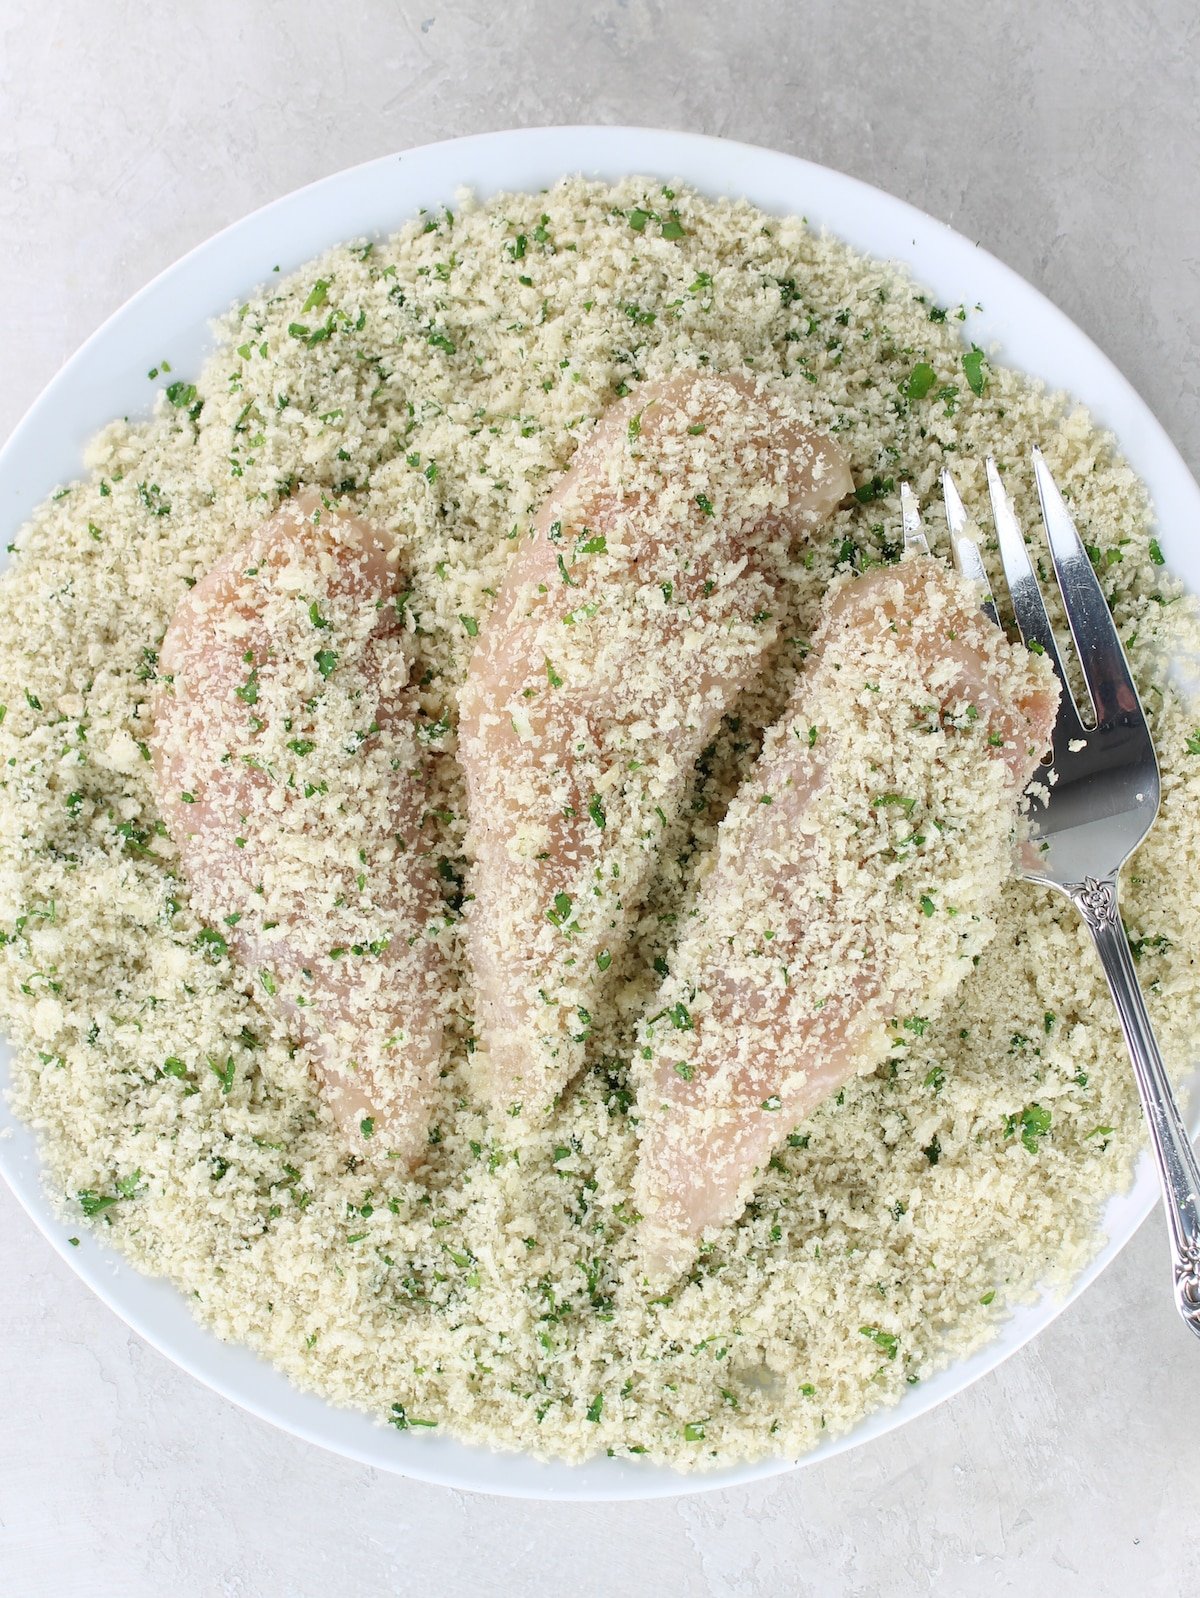 A plate with the meat folded in a mixture of breadcrumbs, parsley and parmesan cheese.